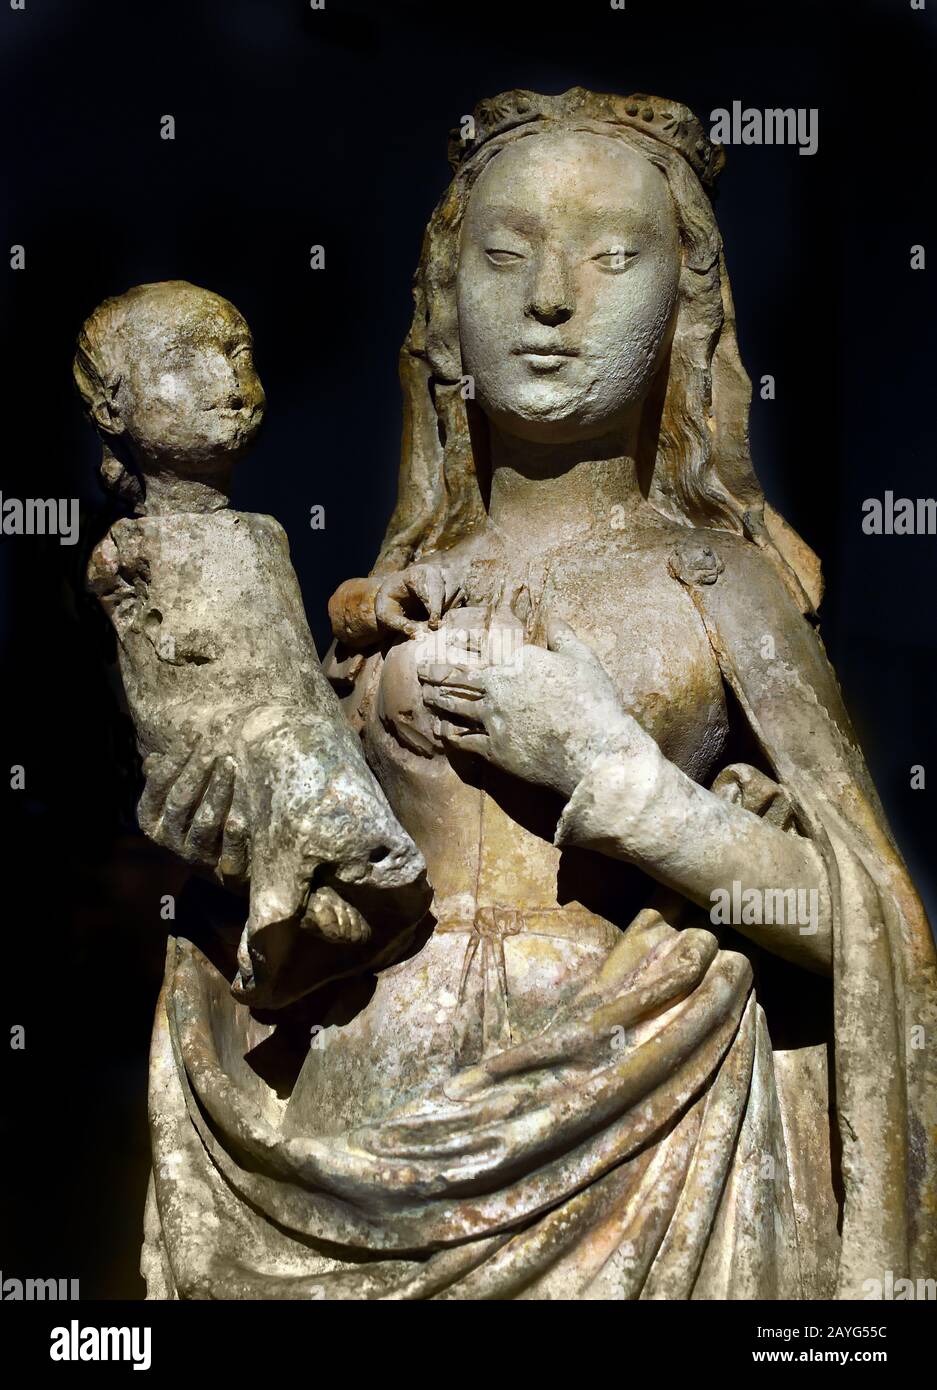 Virgin and Child 1500 Museum Poitiers French, France, ( remarkable sculpture  Poitou around 1500 ) Stock Photo